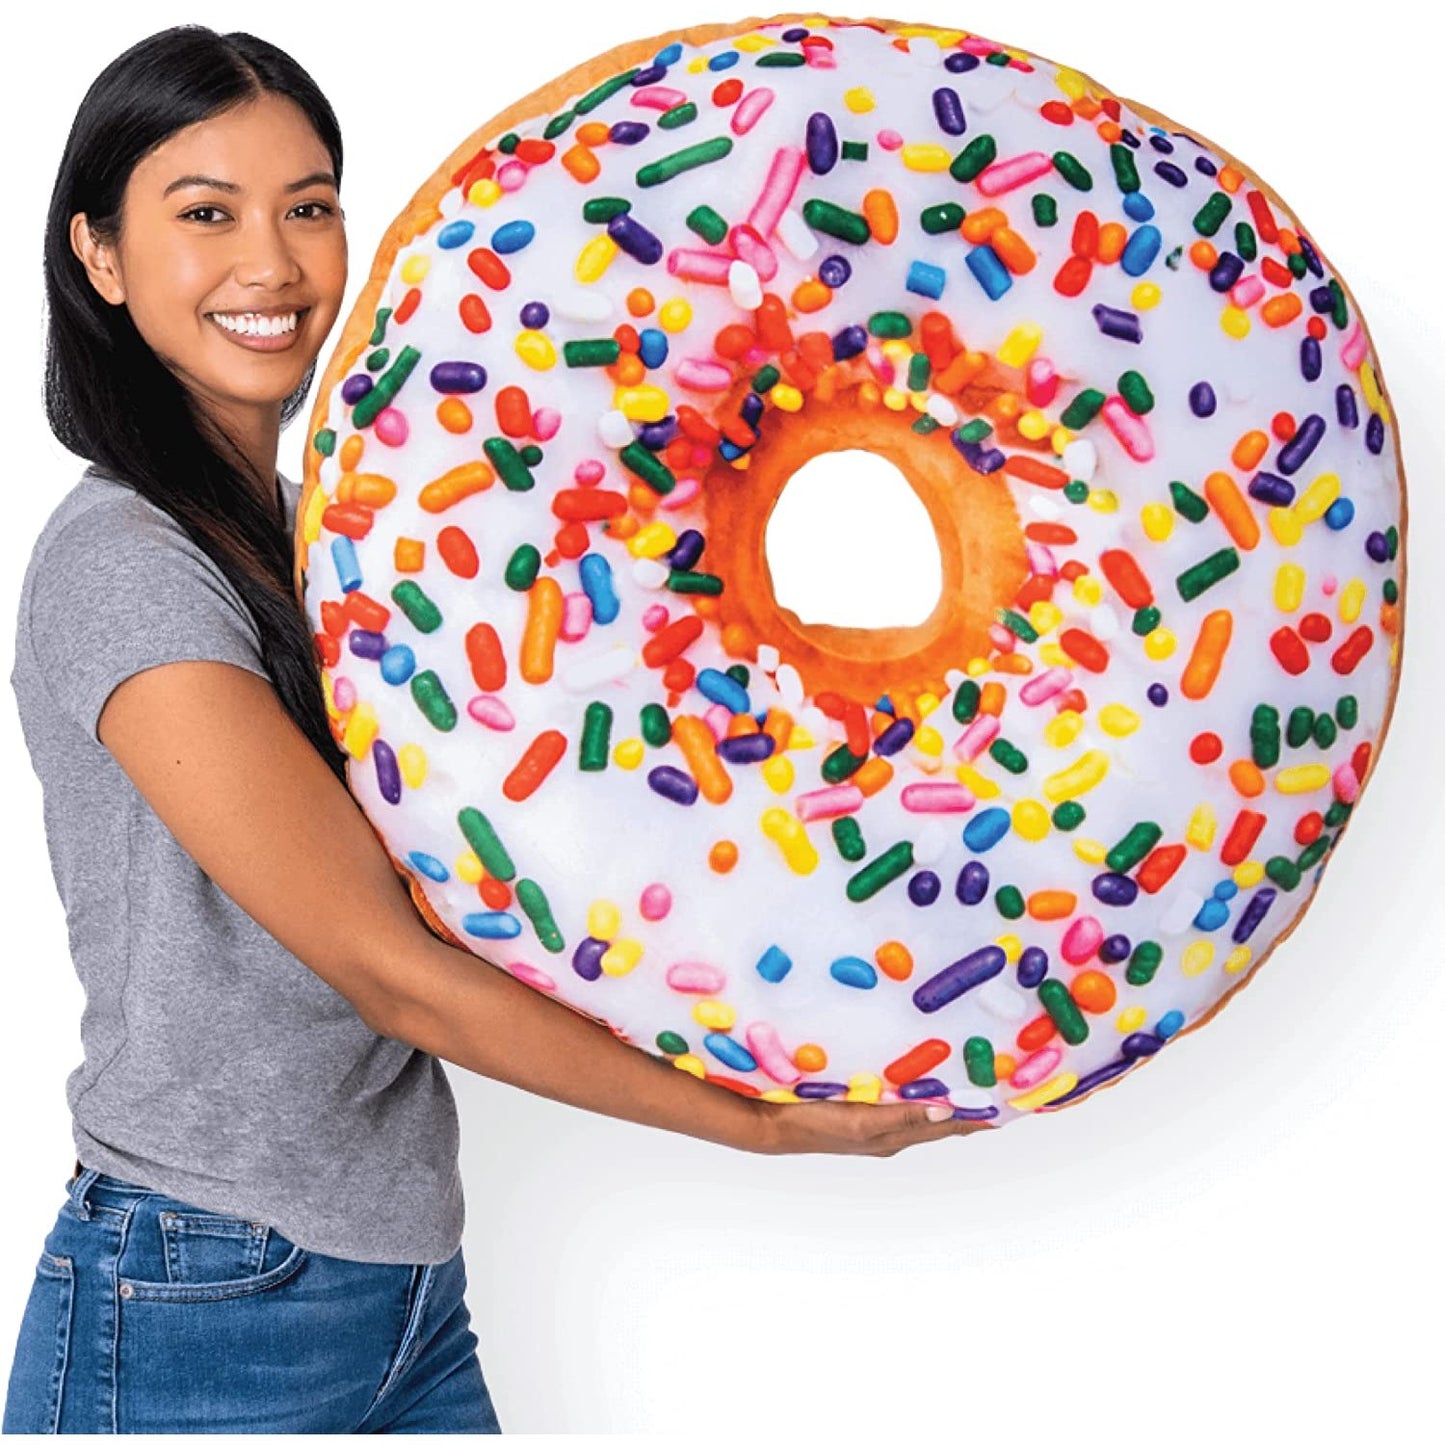 A woman is holding a colorful donut shaped pillow.